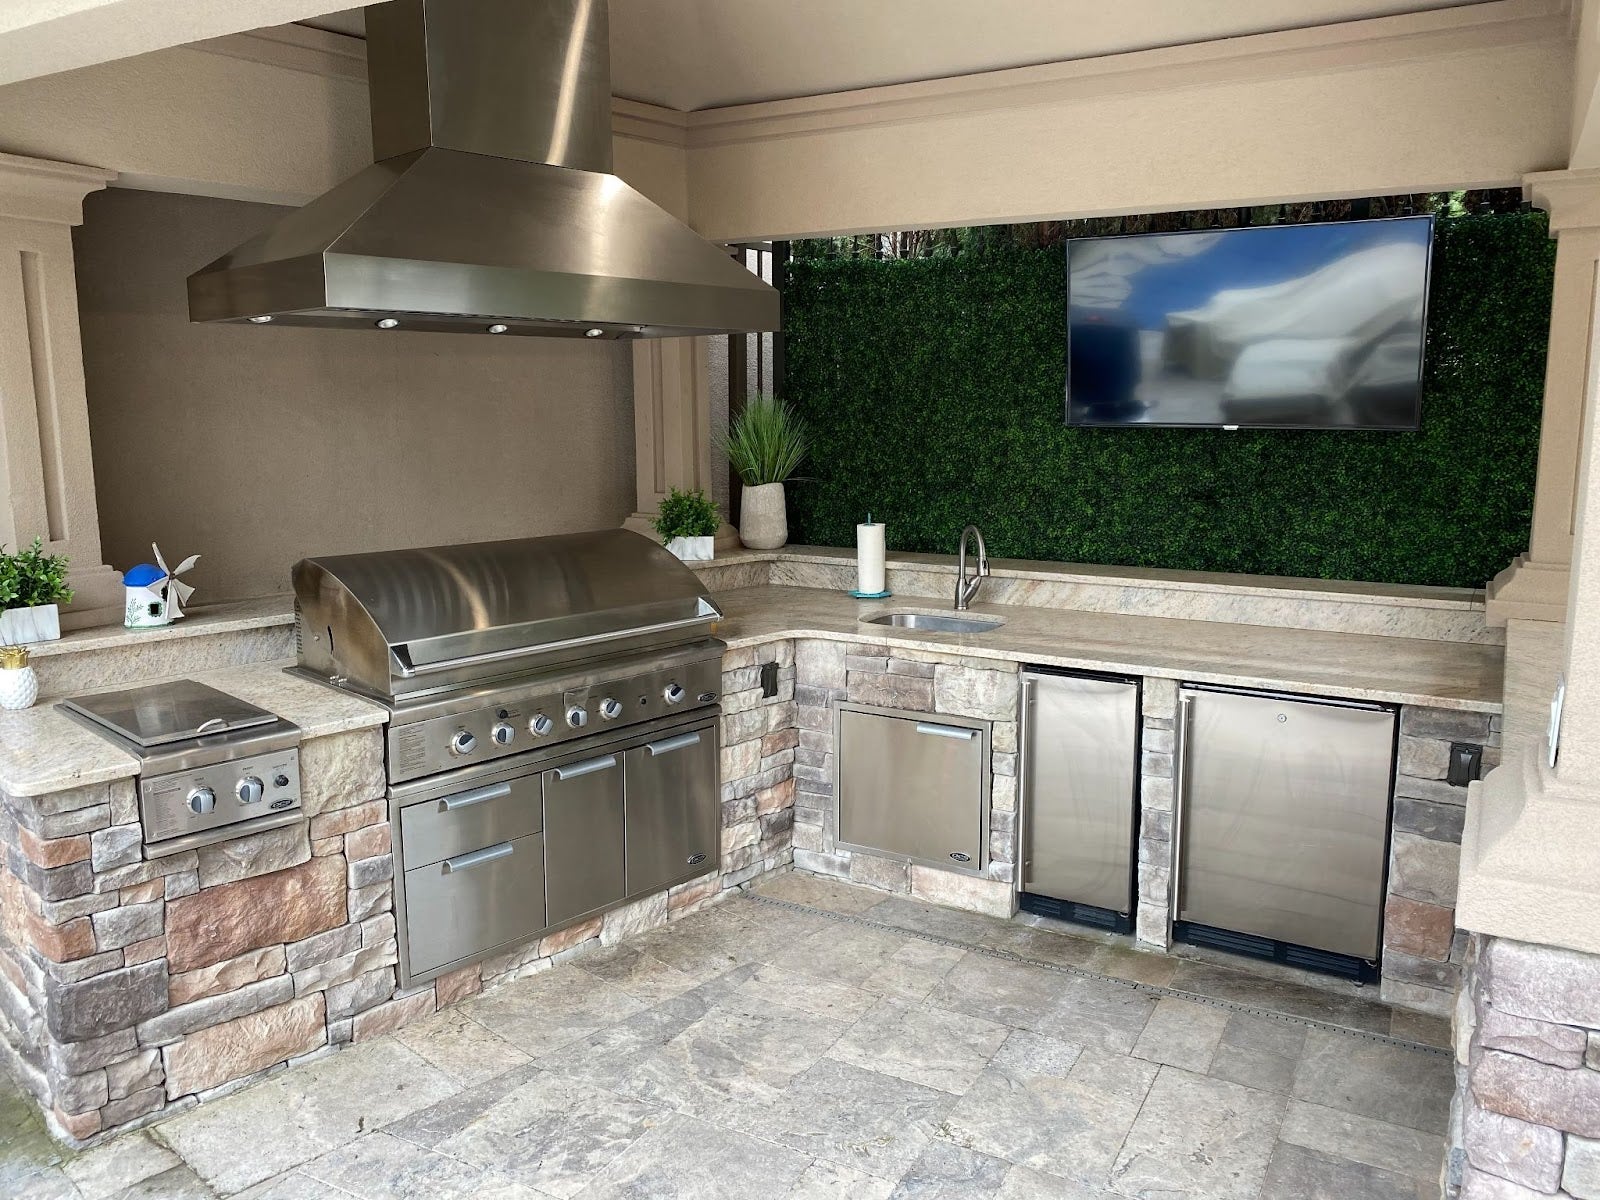 Sleek outdoor cooking area featuring stone worktops, stainless steel appliances, and a mounted television against a lush green backdrop. - Proline Range Hoods - prolinerangehoods.com 